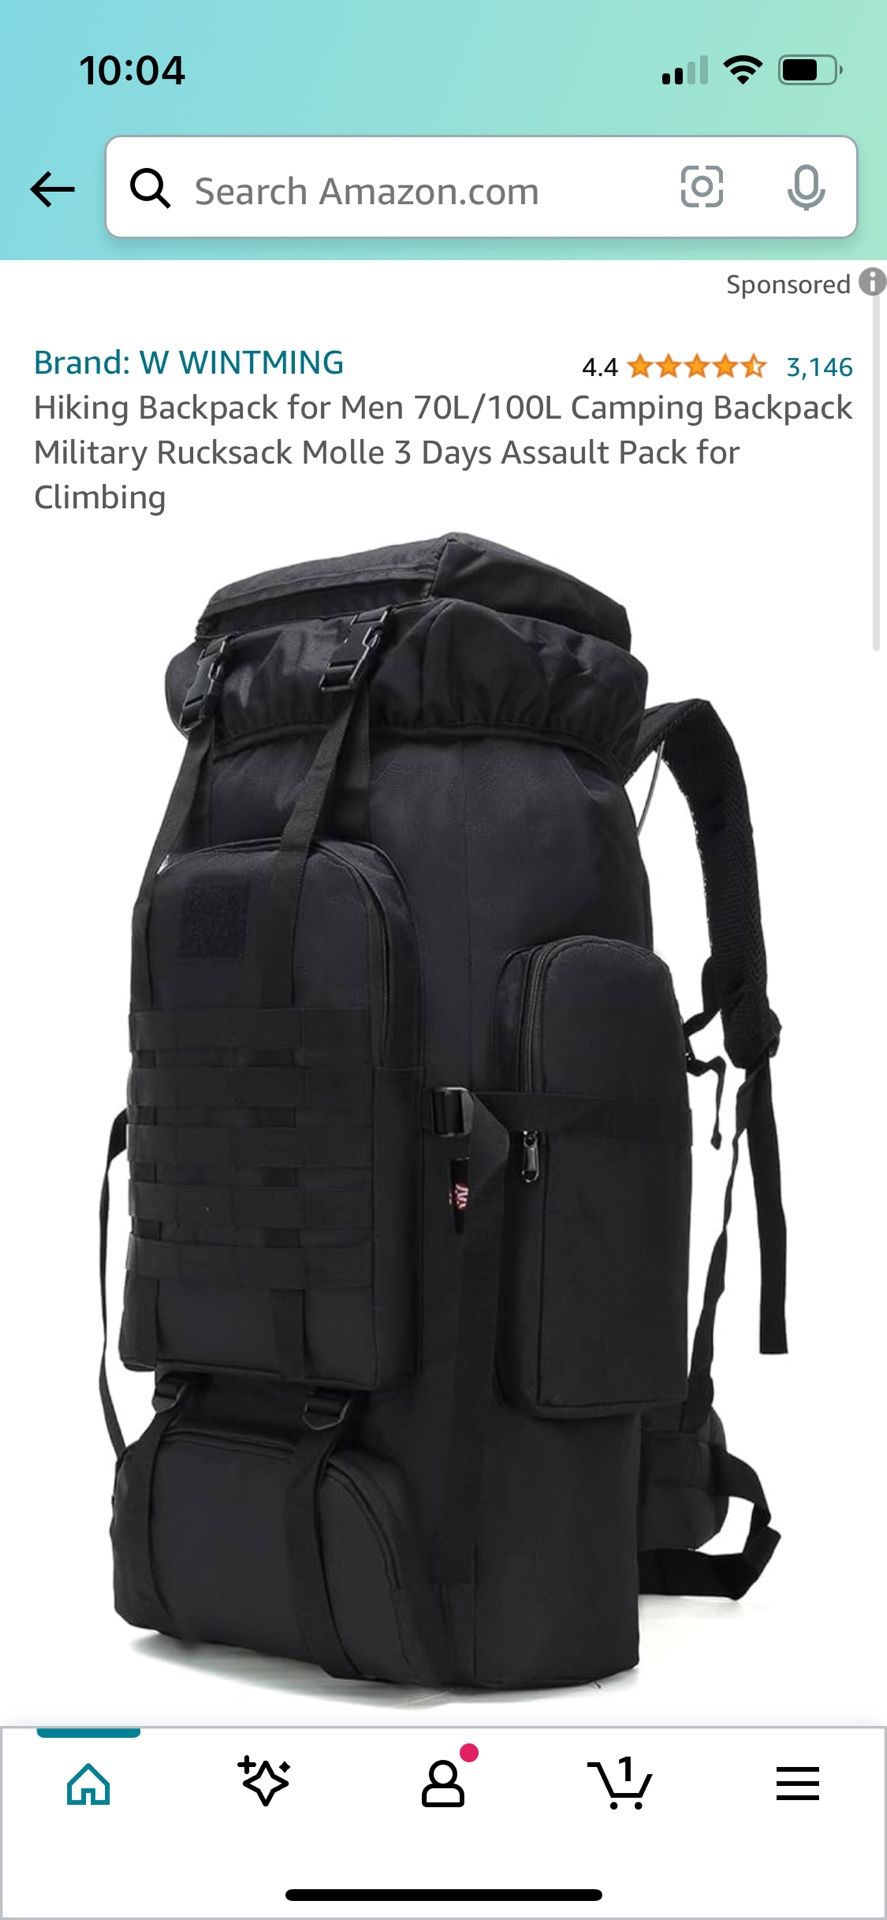 WINTMING 70/100L Backpacking Backpack